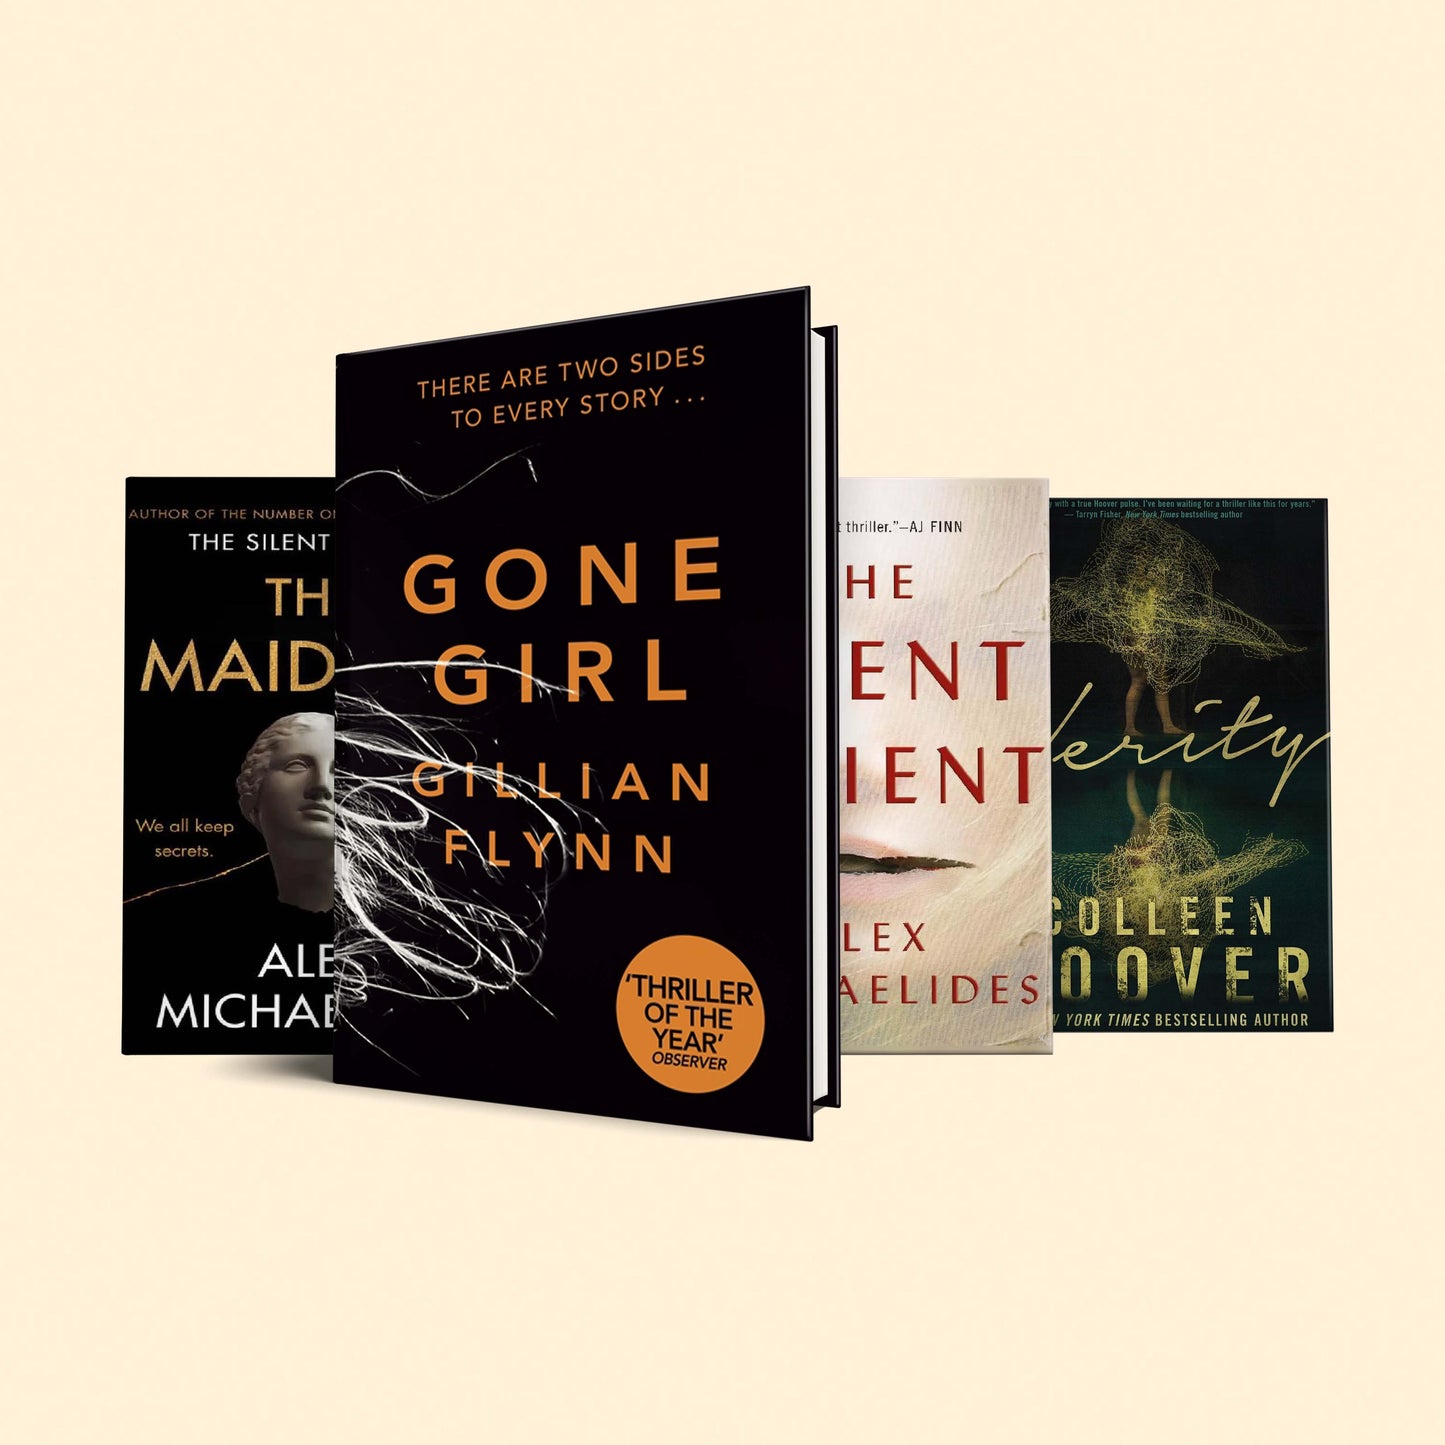 4 Psychological Thriller Books That Will Mess With Your Mind :The silent patient, Verity, The maidens, Gone girl